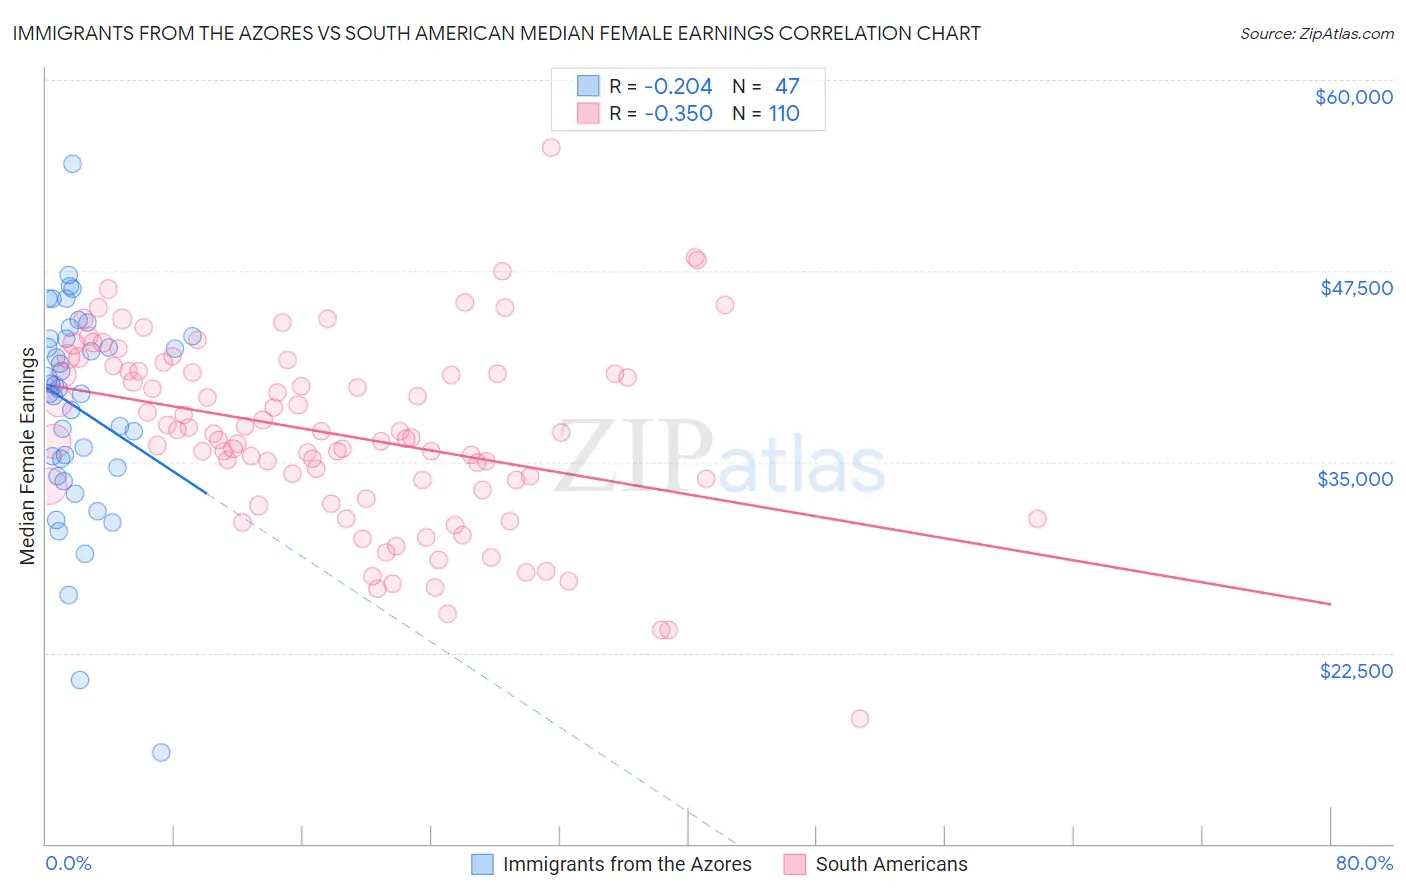 Immigrants from the Azores vs South American Median Female Earnings